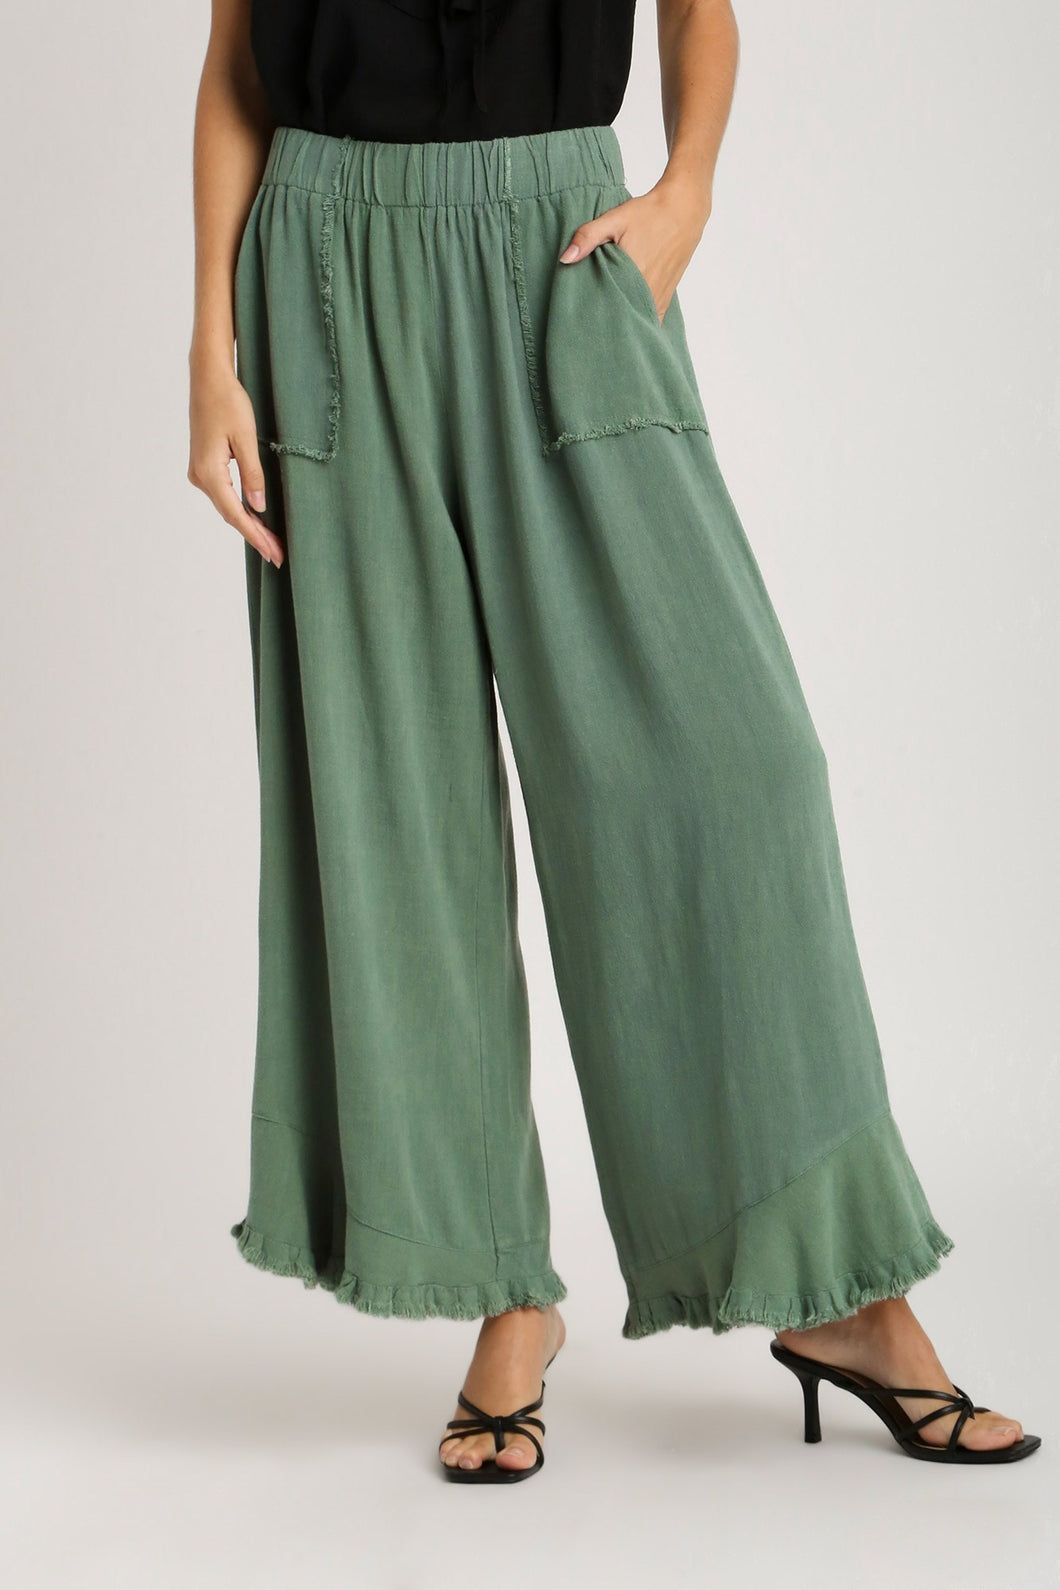 Umgee Solid Color Linen Blend Wide Leg Pants in Lagoon Pants Umgee   